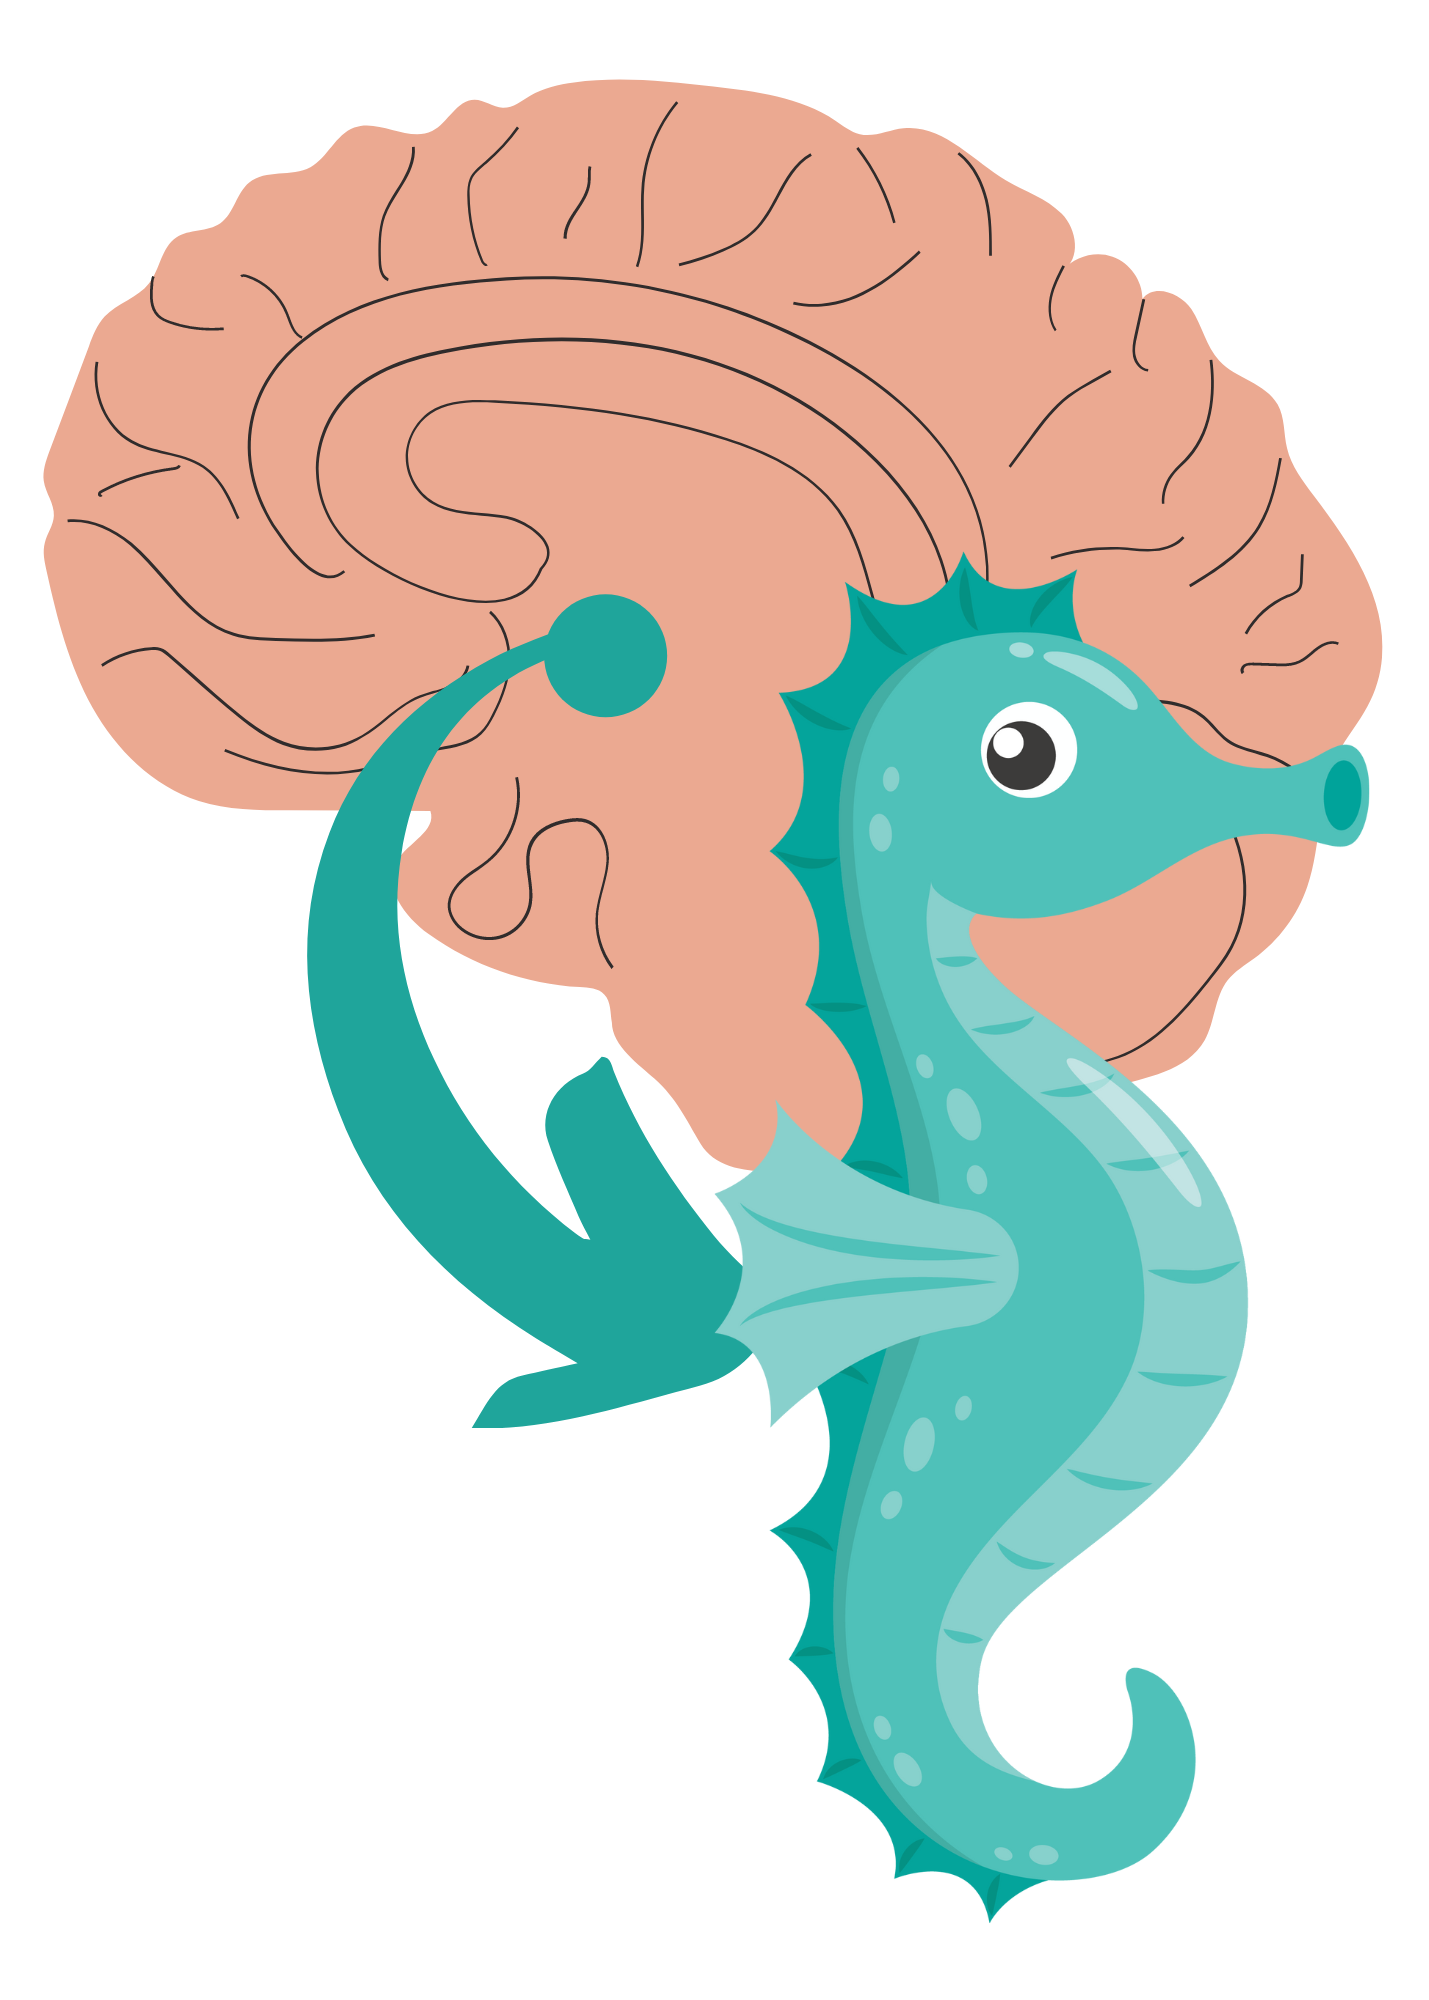 get to know the hippocampus and its role in memory and dementia progression